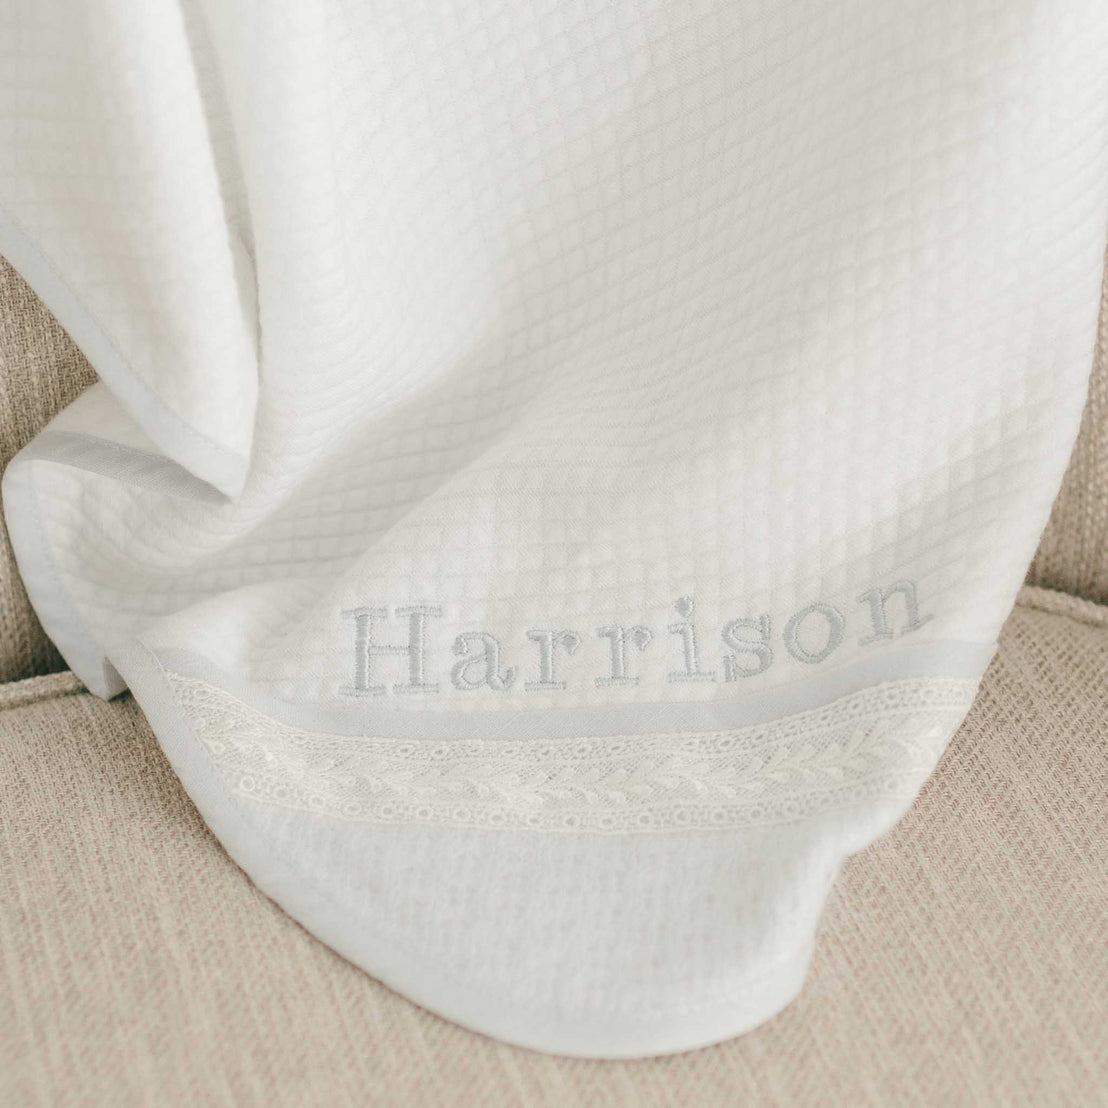 Flat lay photo detail of the Harrison Personalized Blanket made with a plush quilted white cotton and trimmed with light blue linen. The accent corner features ivory Venice lace. On the corner of the blanket is the name "Harrison" embroidered in light blue thread